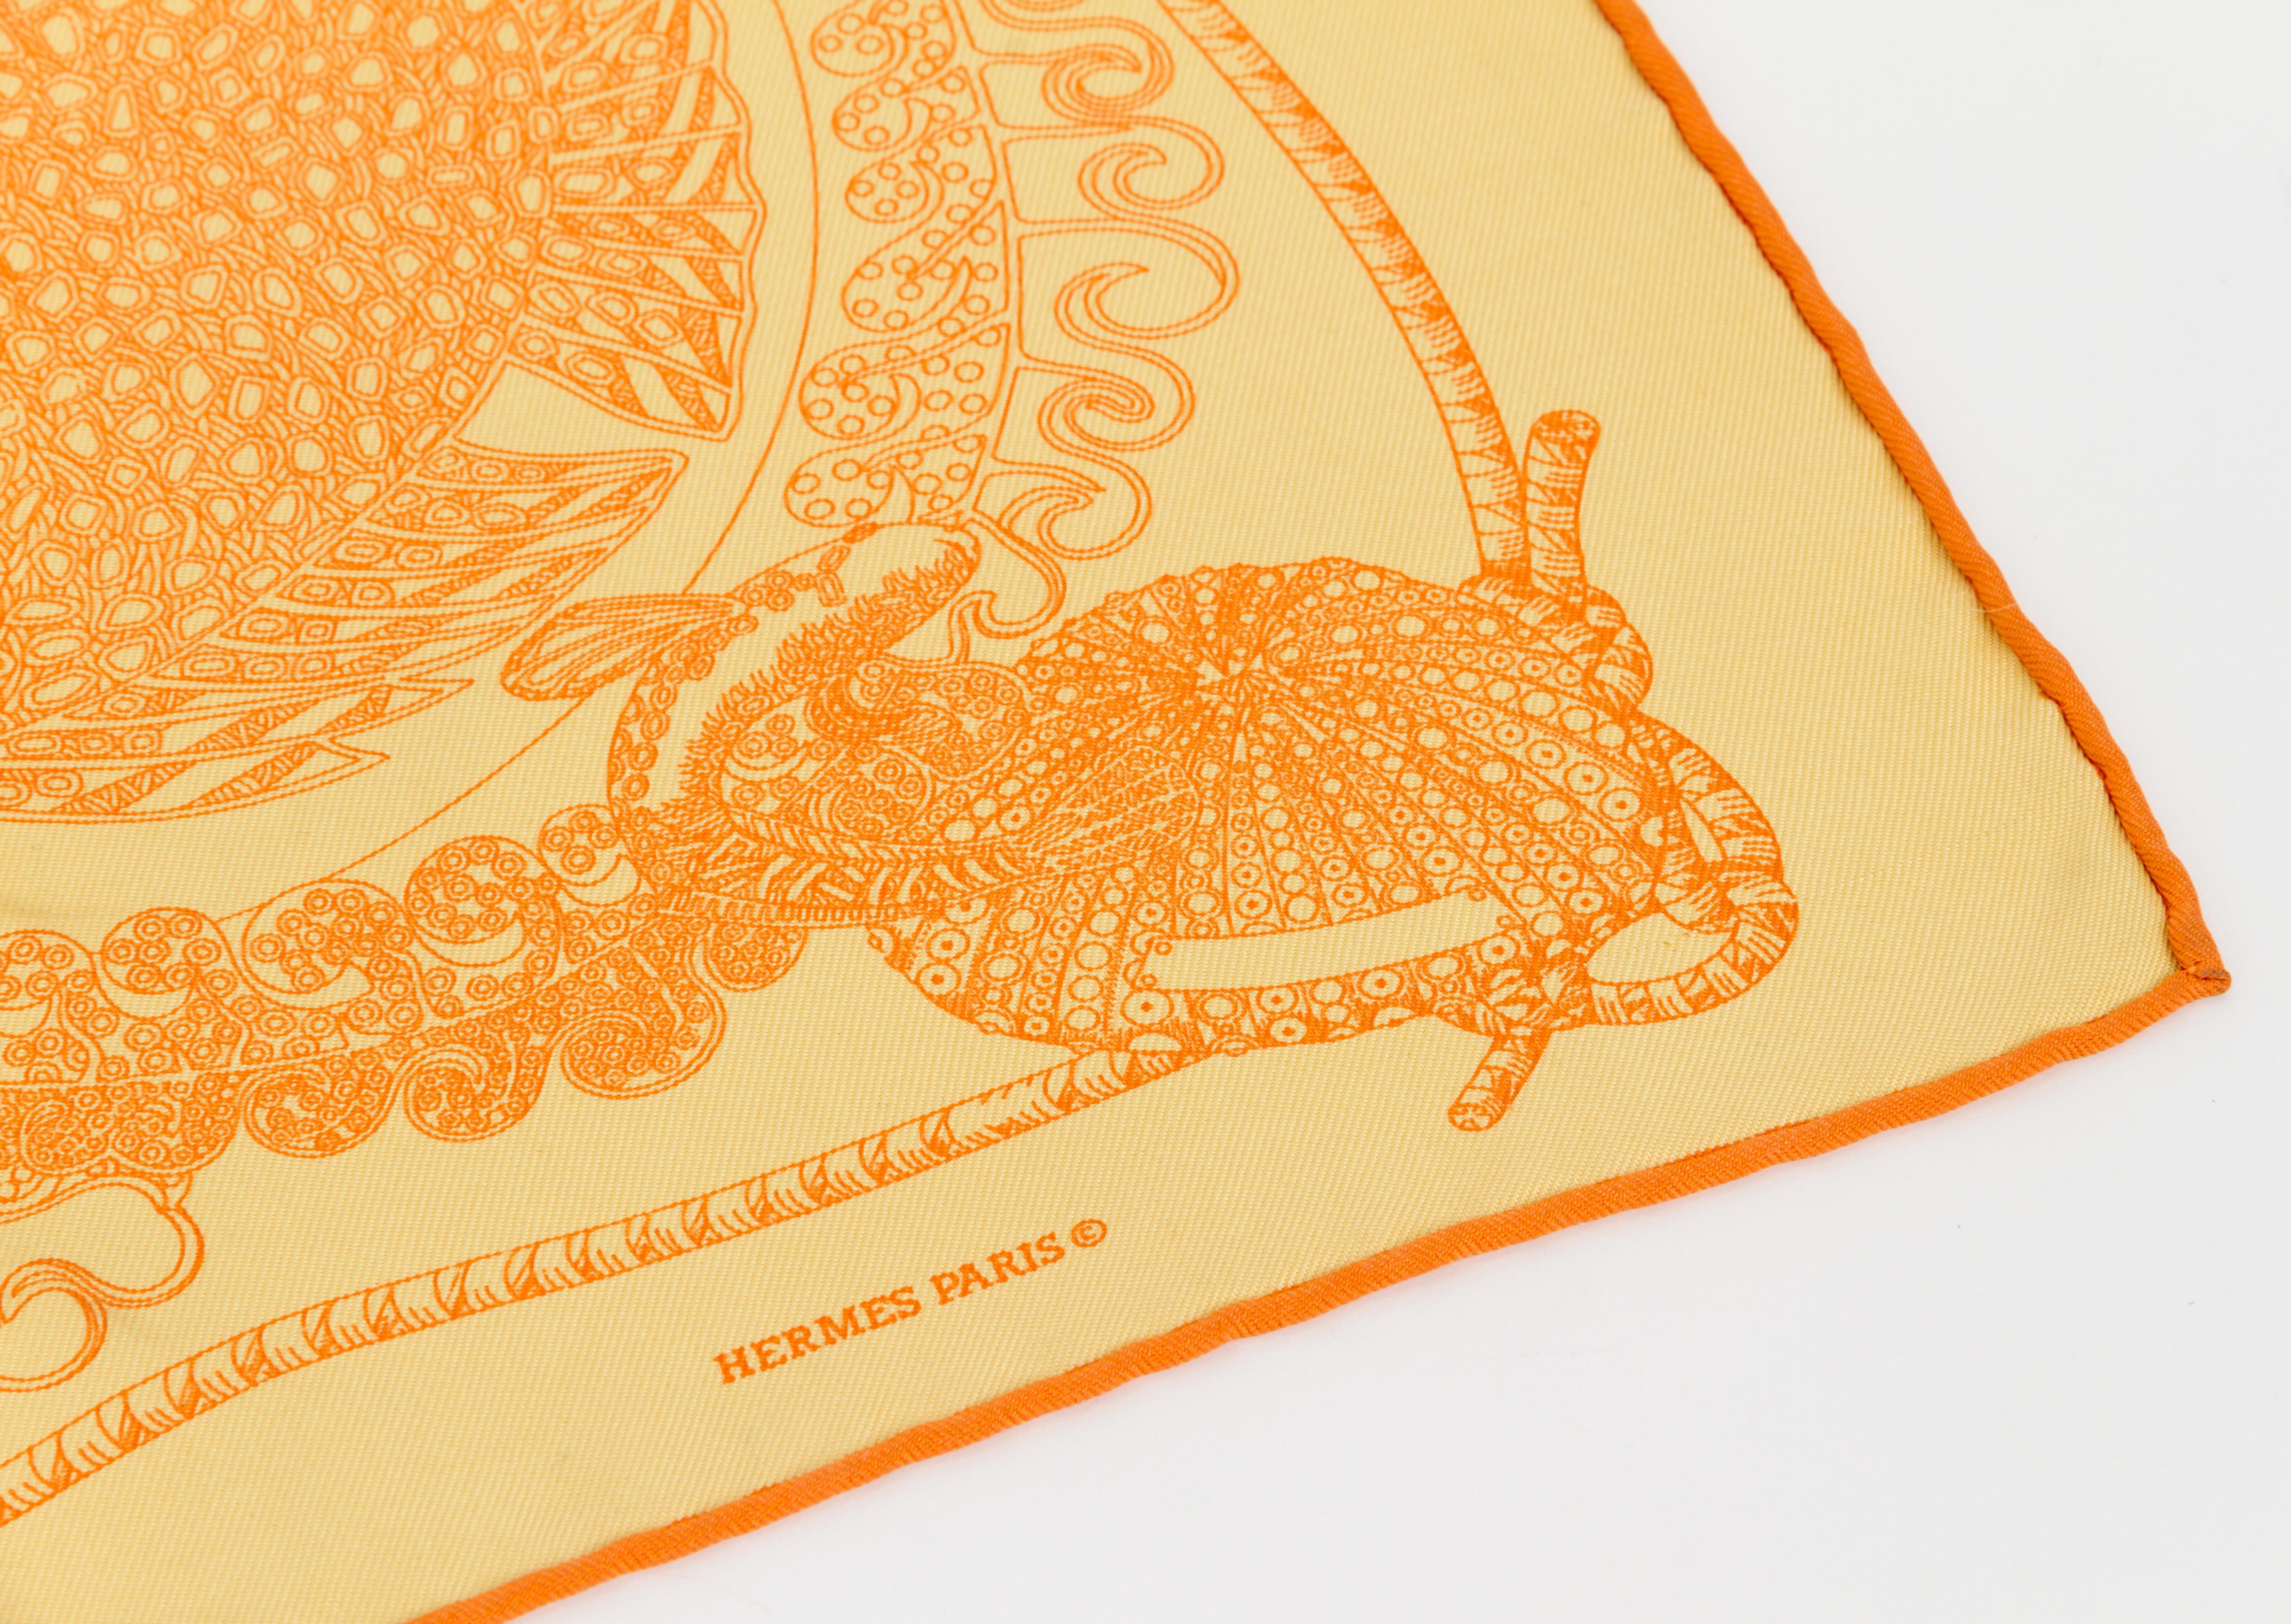 Hermès yellow and orange fish pochette scarf with hand-rolled edges. Original care tag.